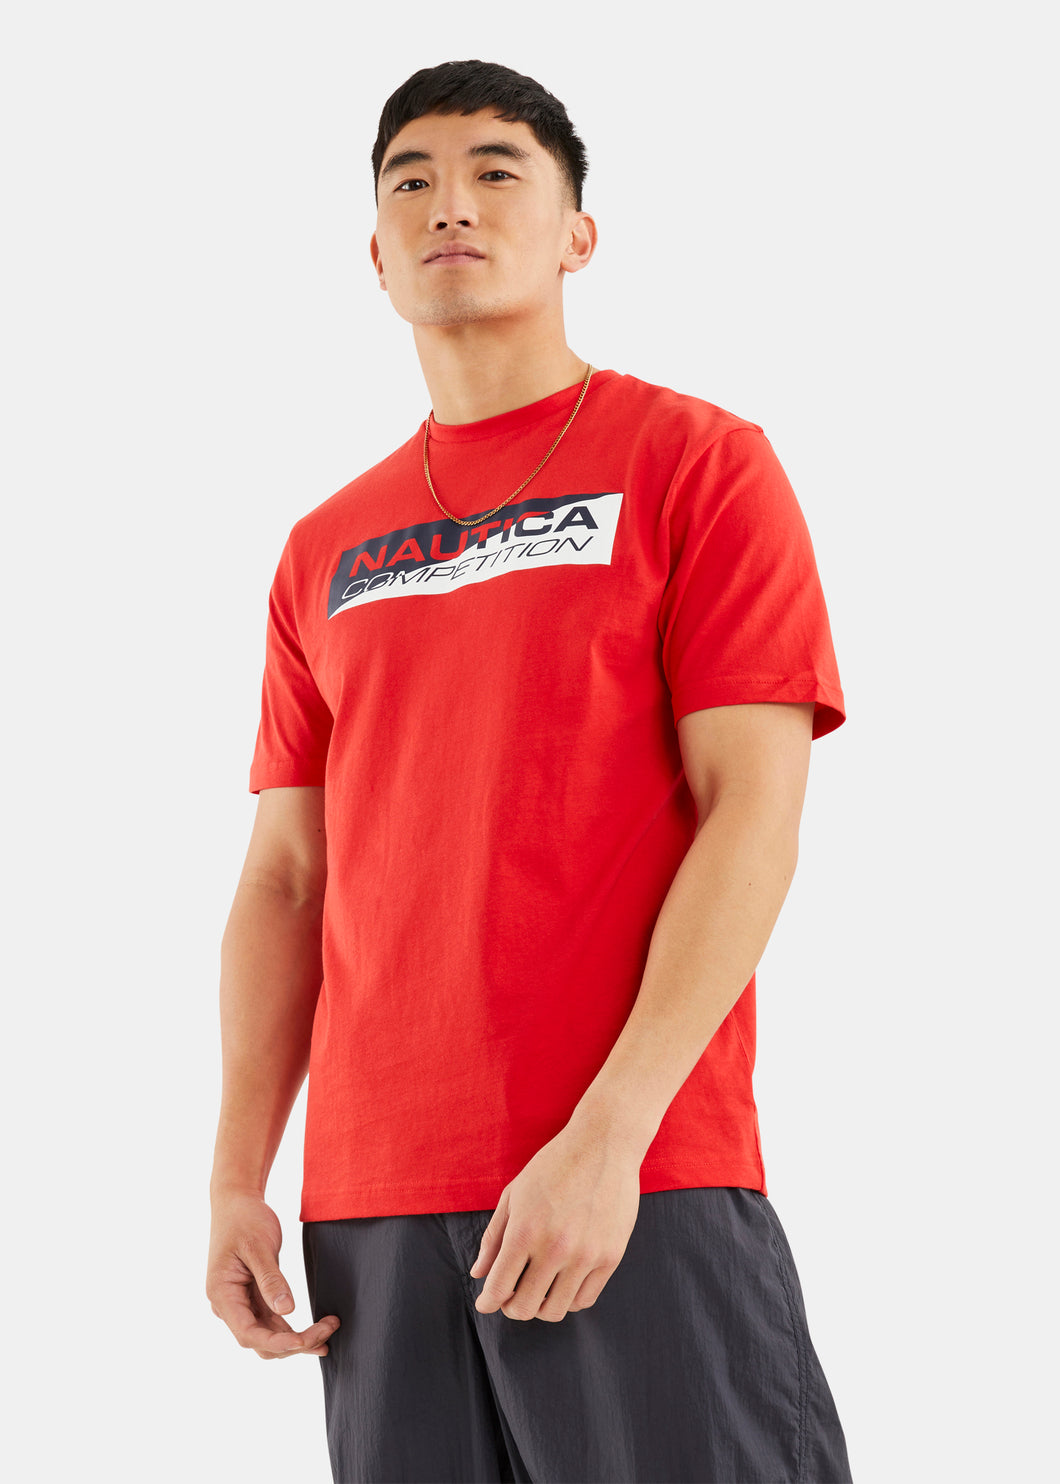 Nautica Competition Baffin T-Shirt - True Red - Front